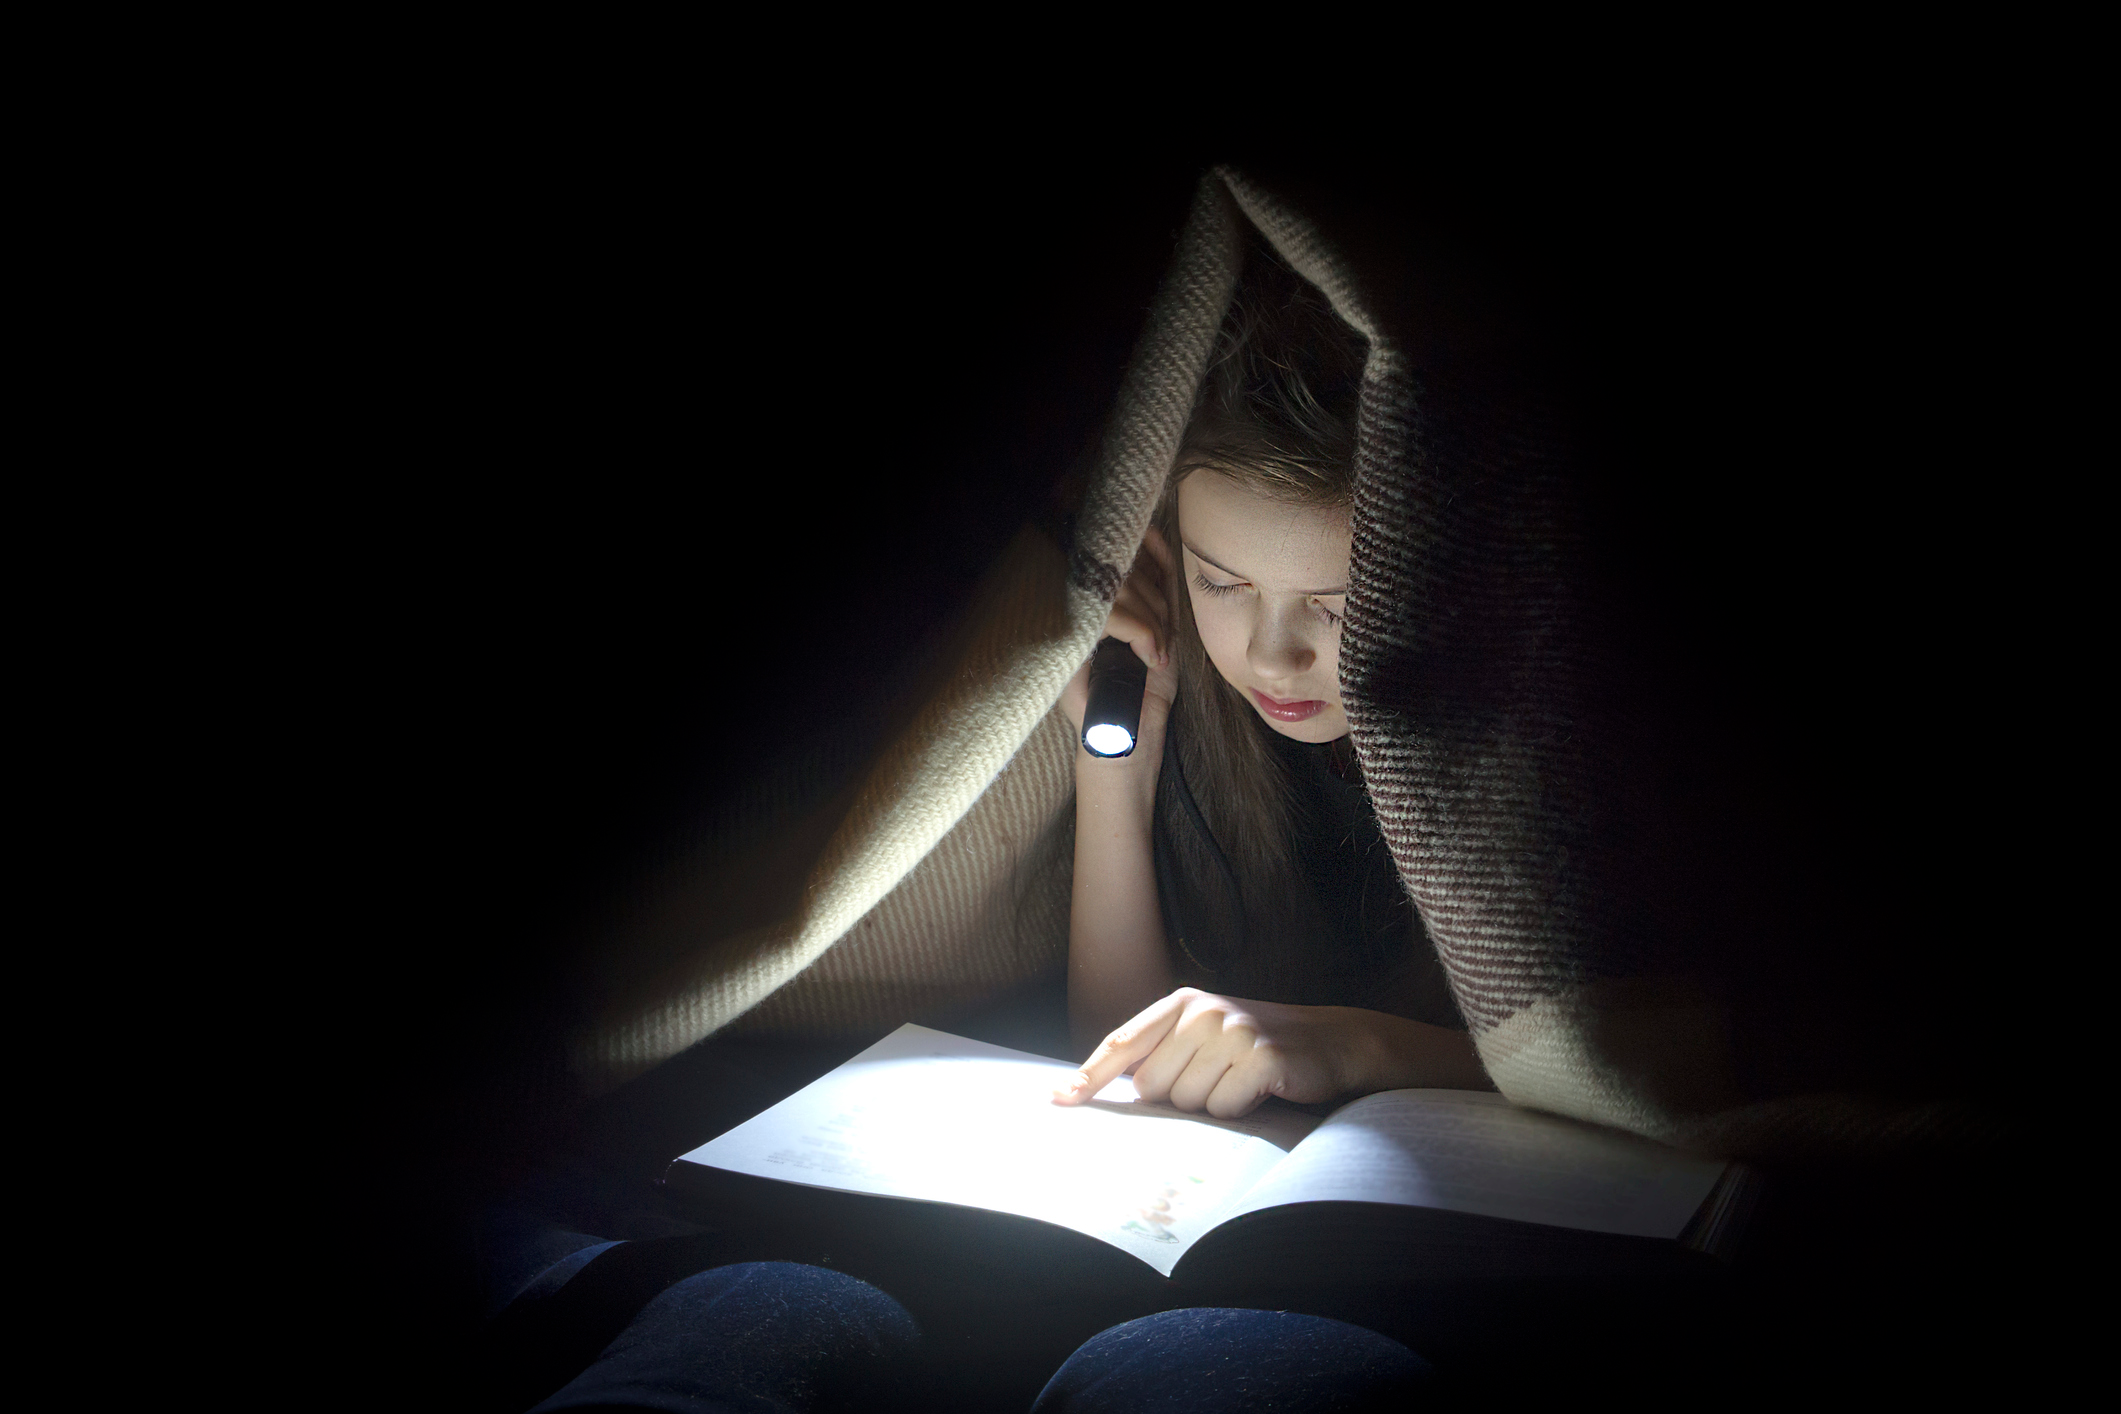 The Right Light for Reading at Night — 1000Bulbs Blog